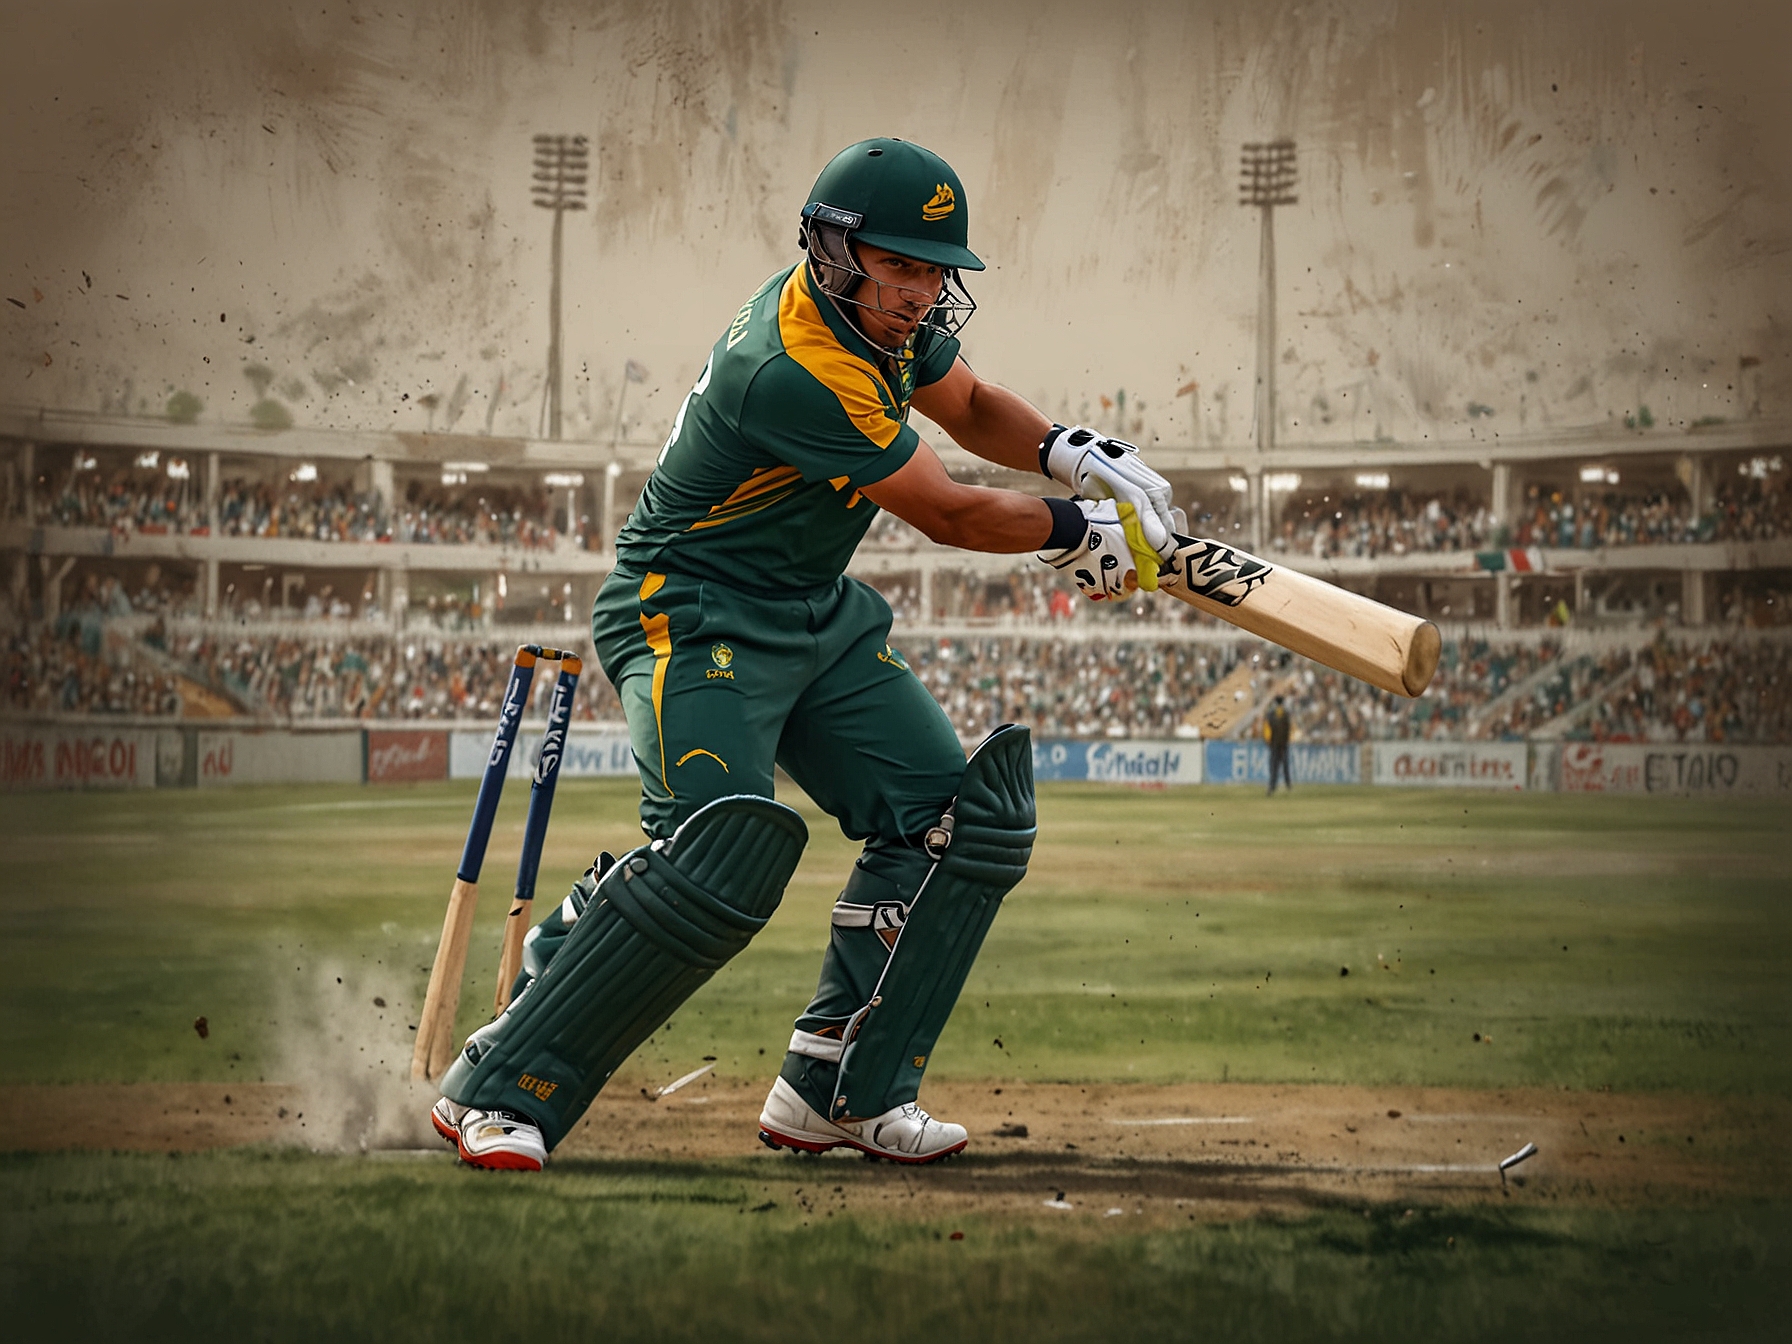 South Africa's Quinton de Kock delivering a powerful shot during the game. The image captures the intensity and determination of the South African side as they aim to regain form.